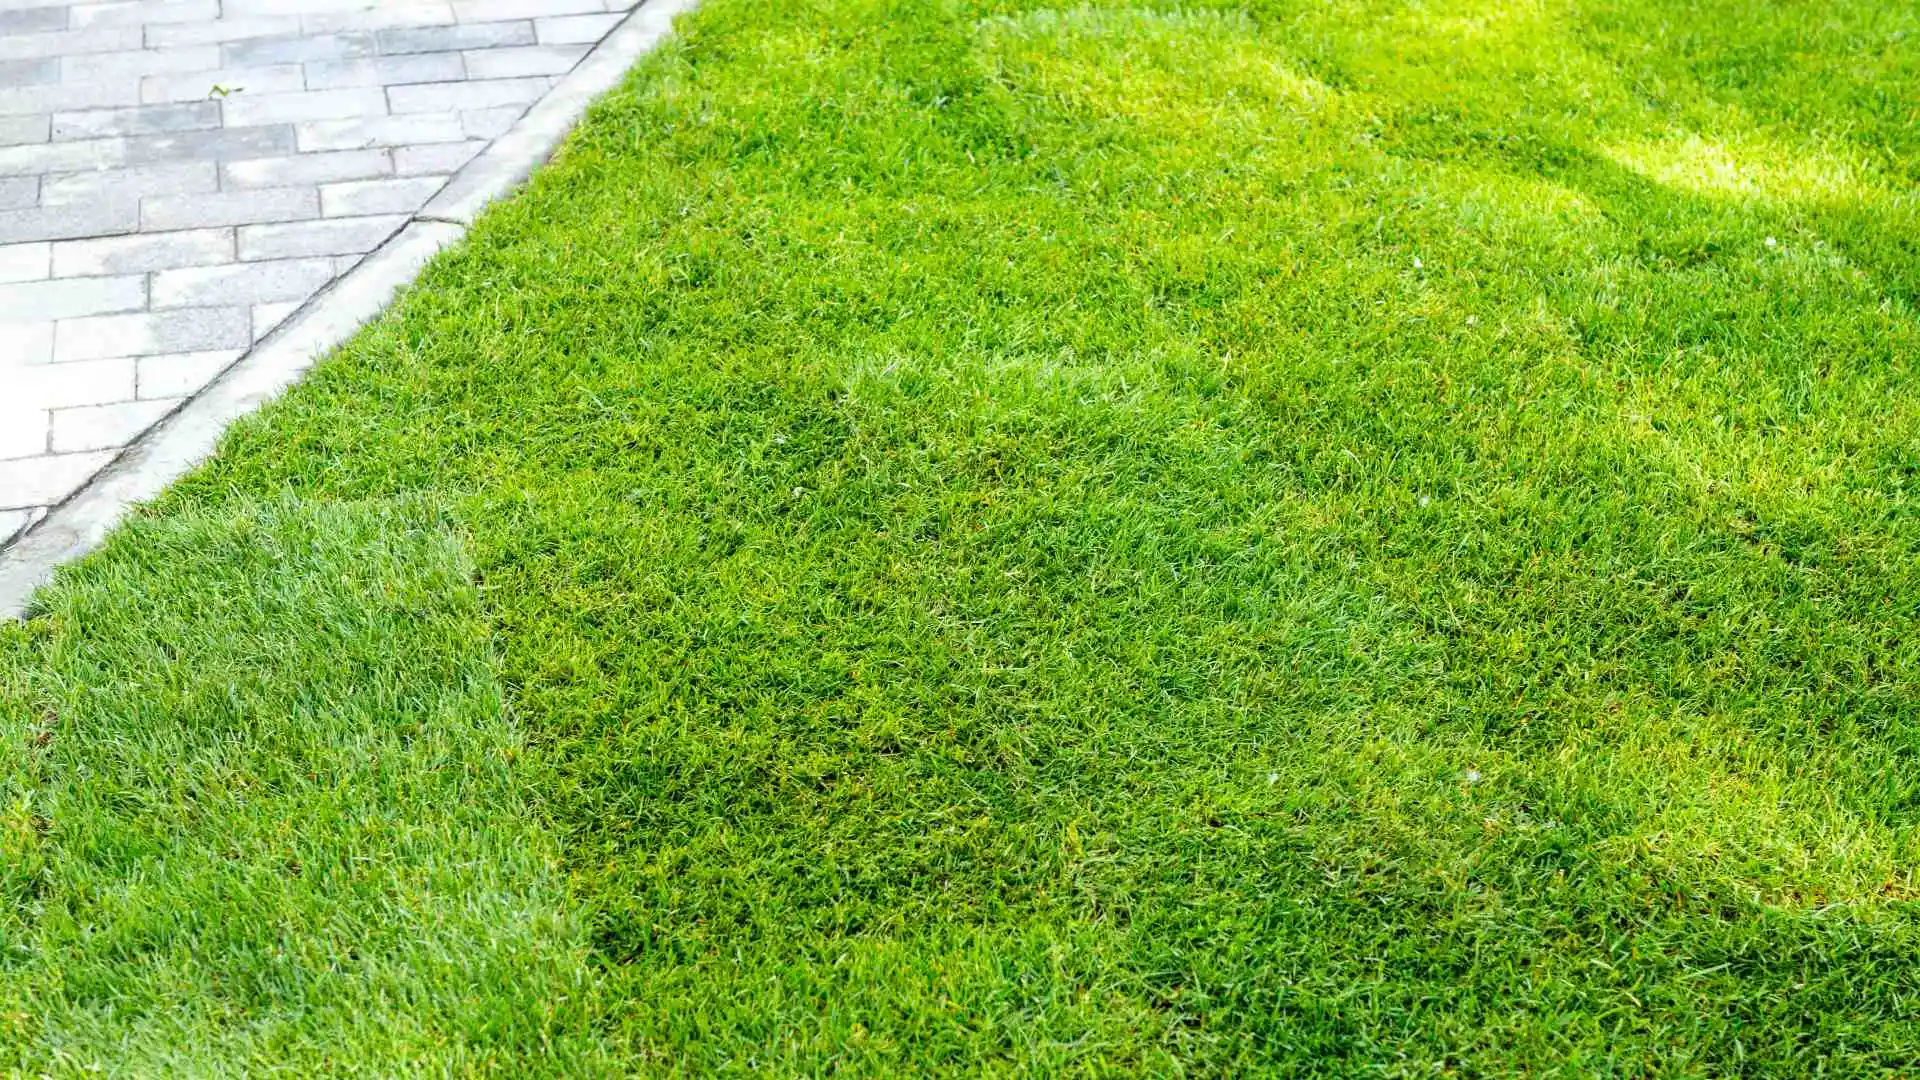 Does Sod Really Give You an Instant Lawn?